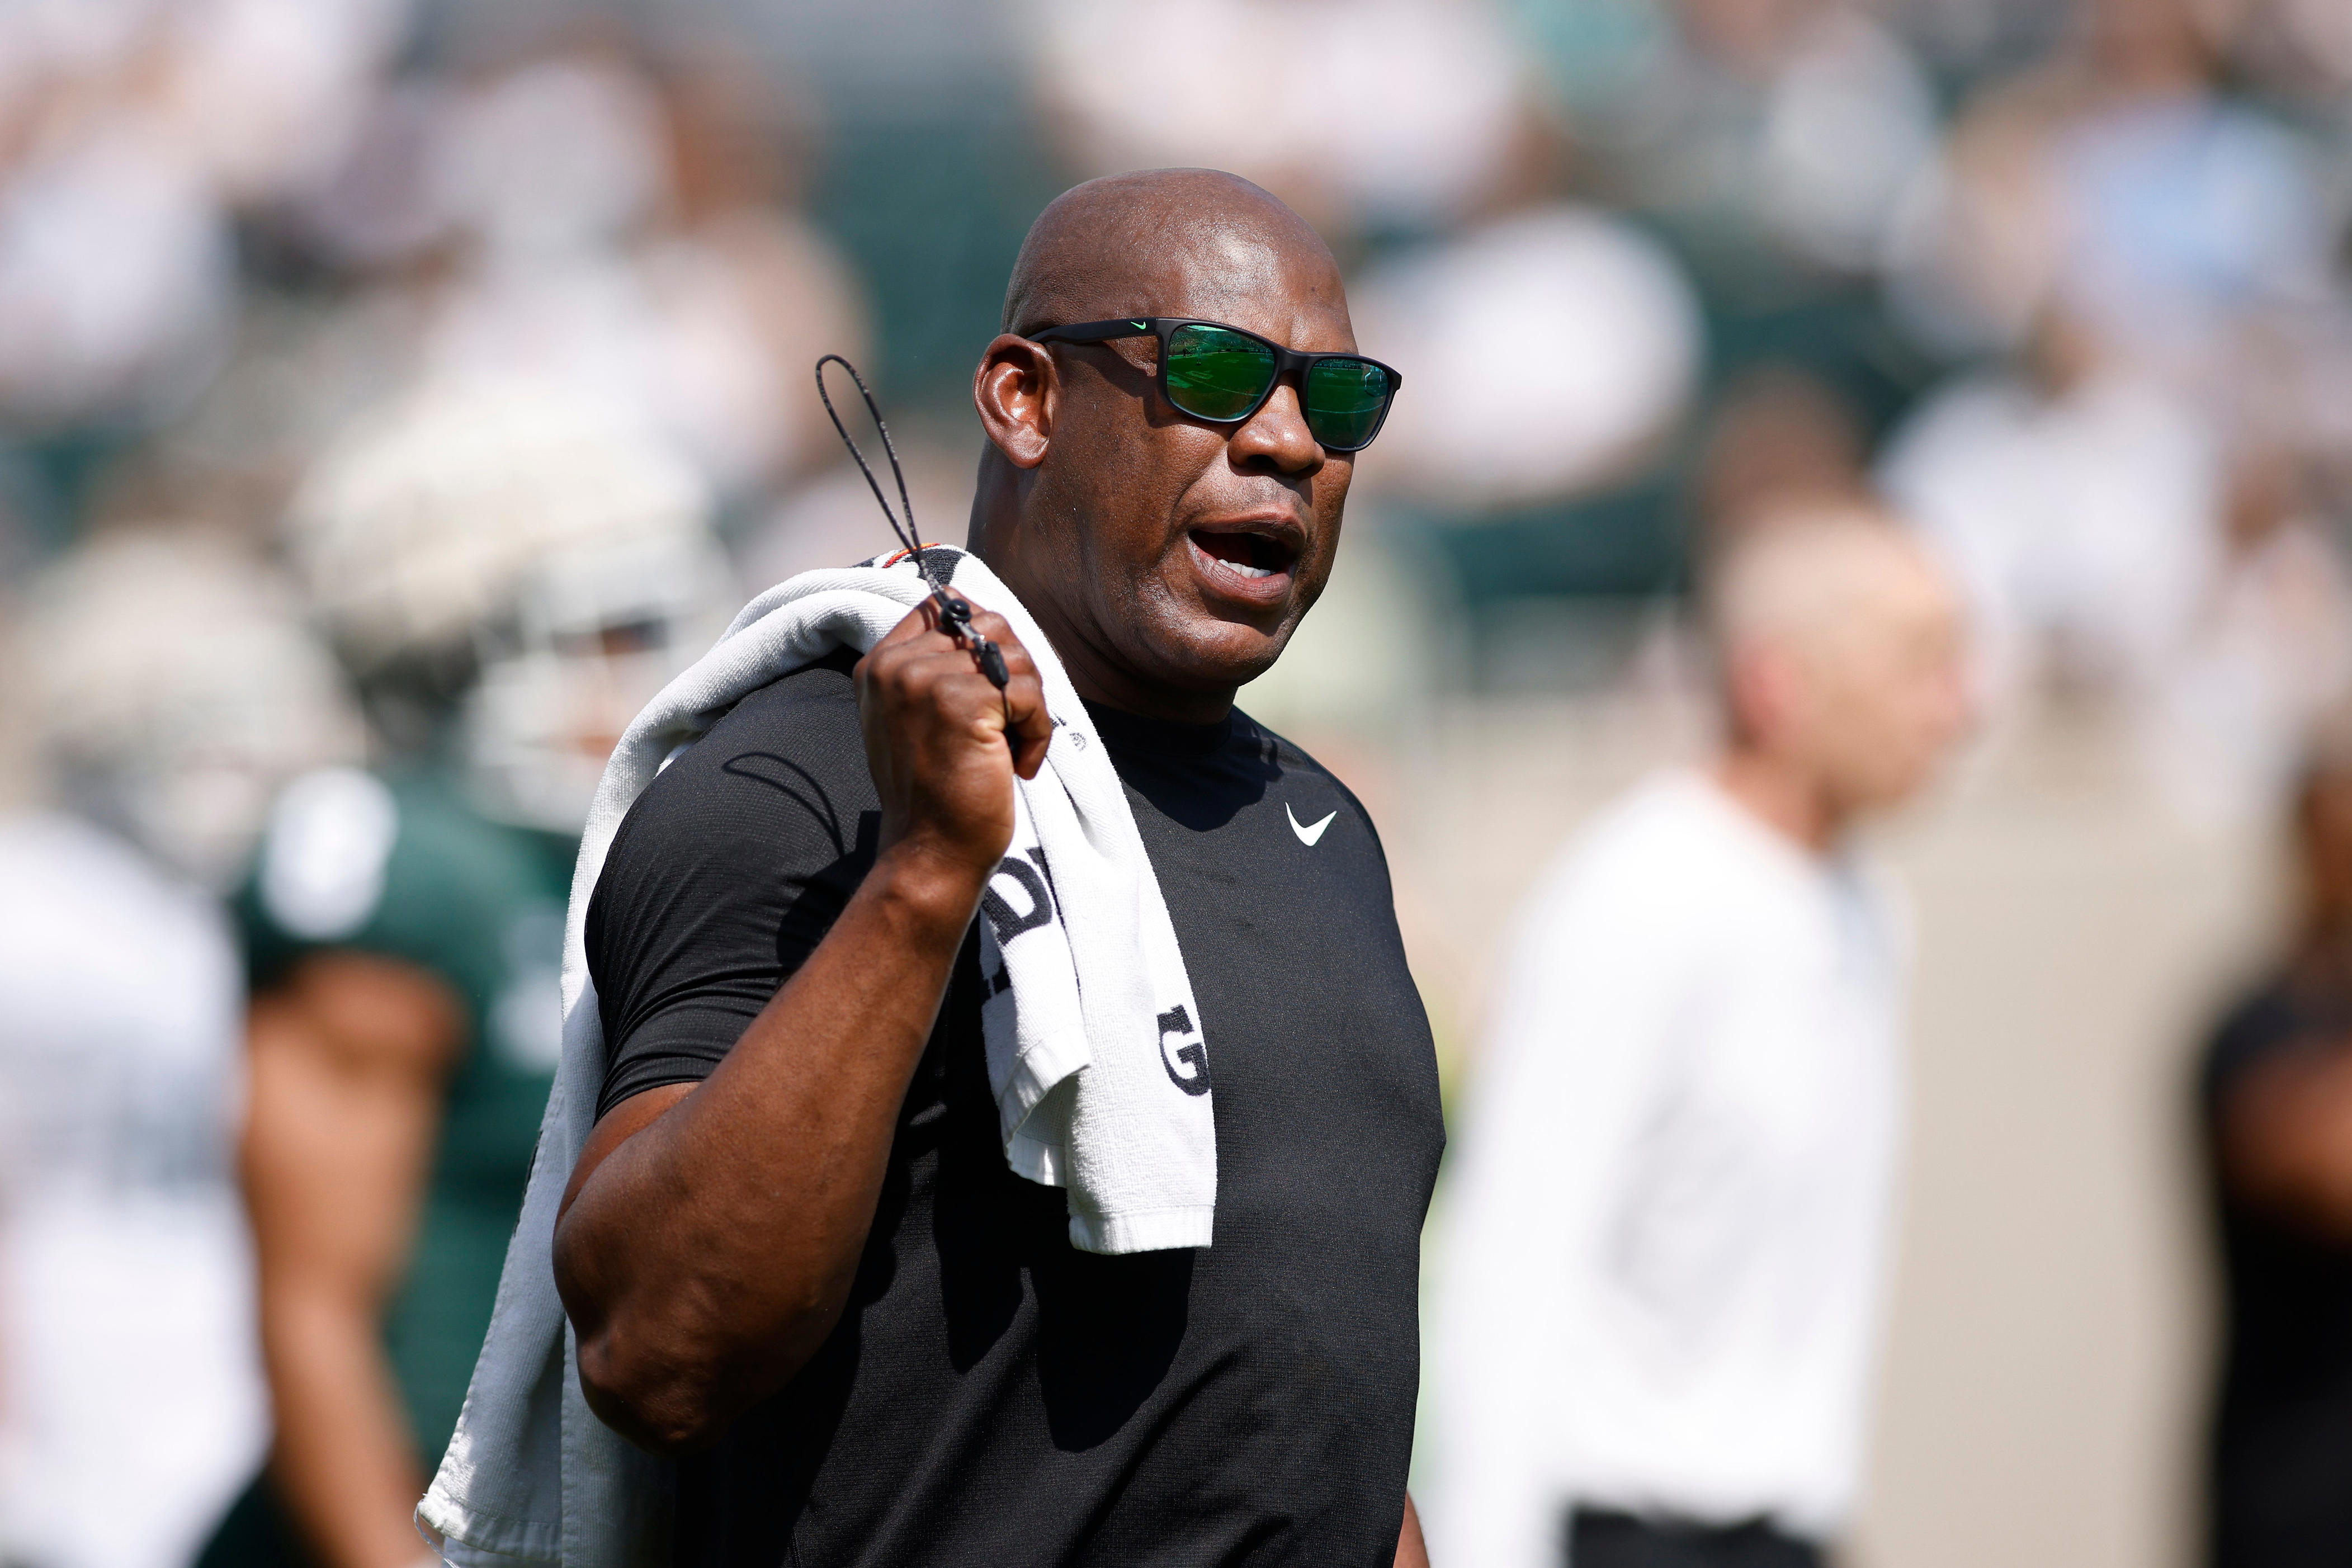 mel tucker banned from future employment, affiliation with michigan state university